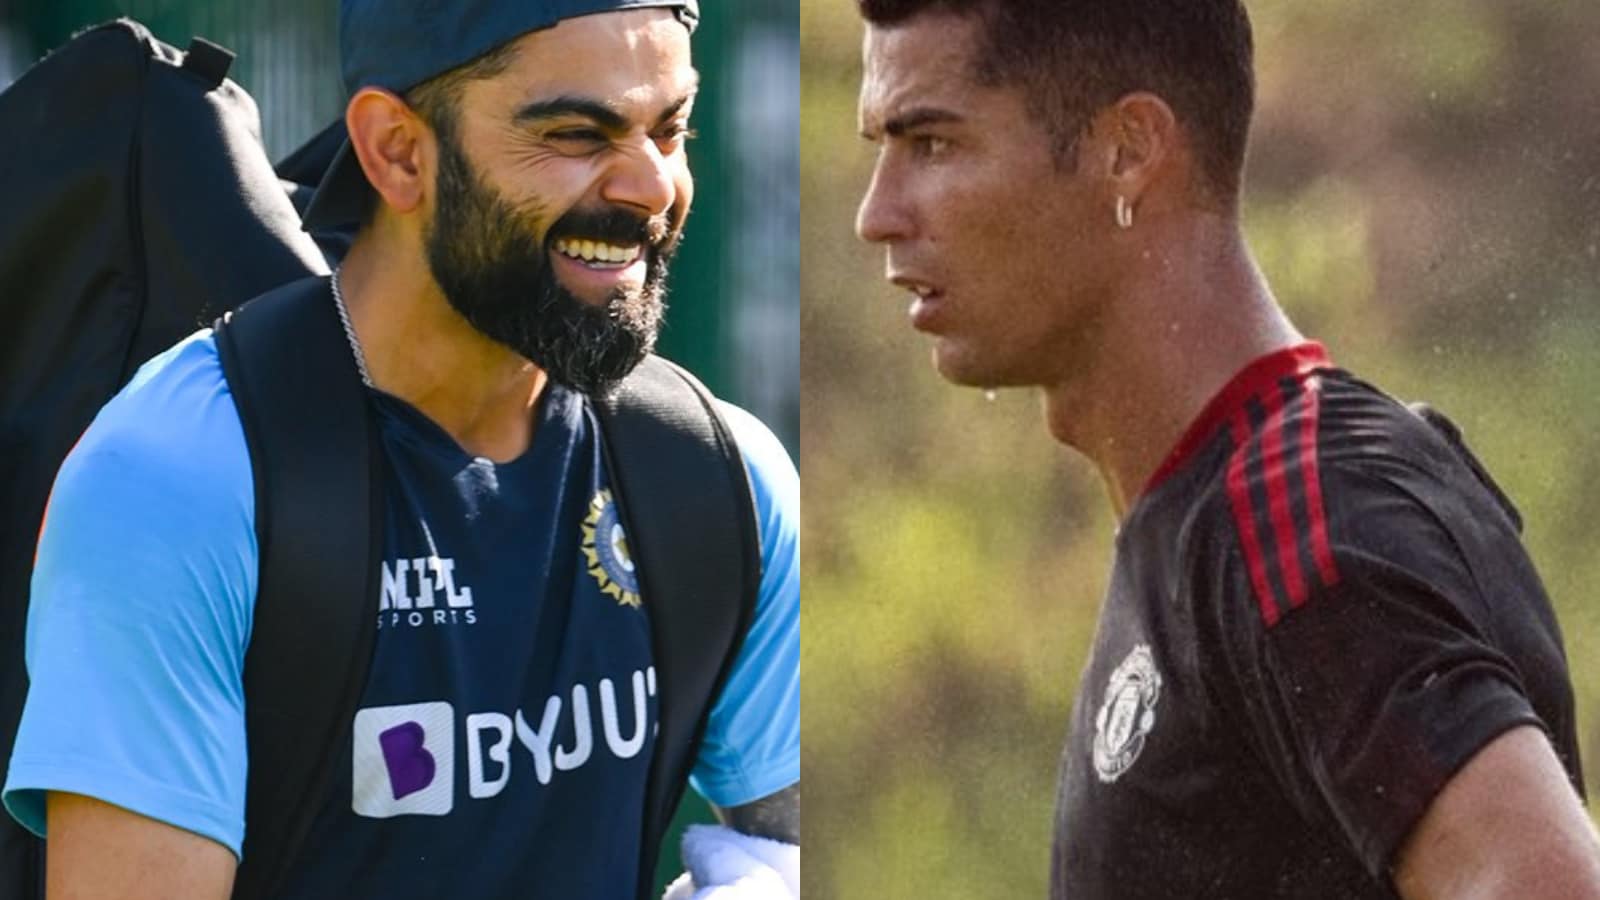 From Cristiano Ronaldo To Virat Kohli: Here Are The Most Famous Sportsperson  In The World